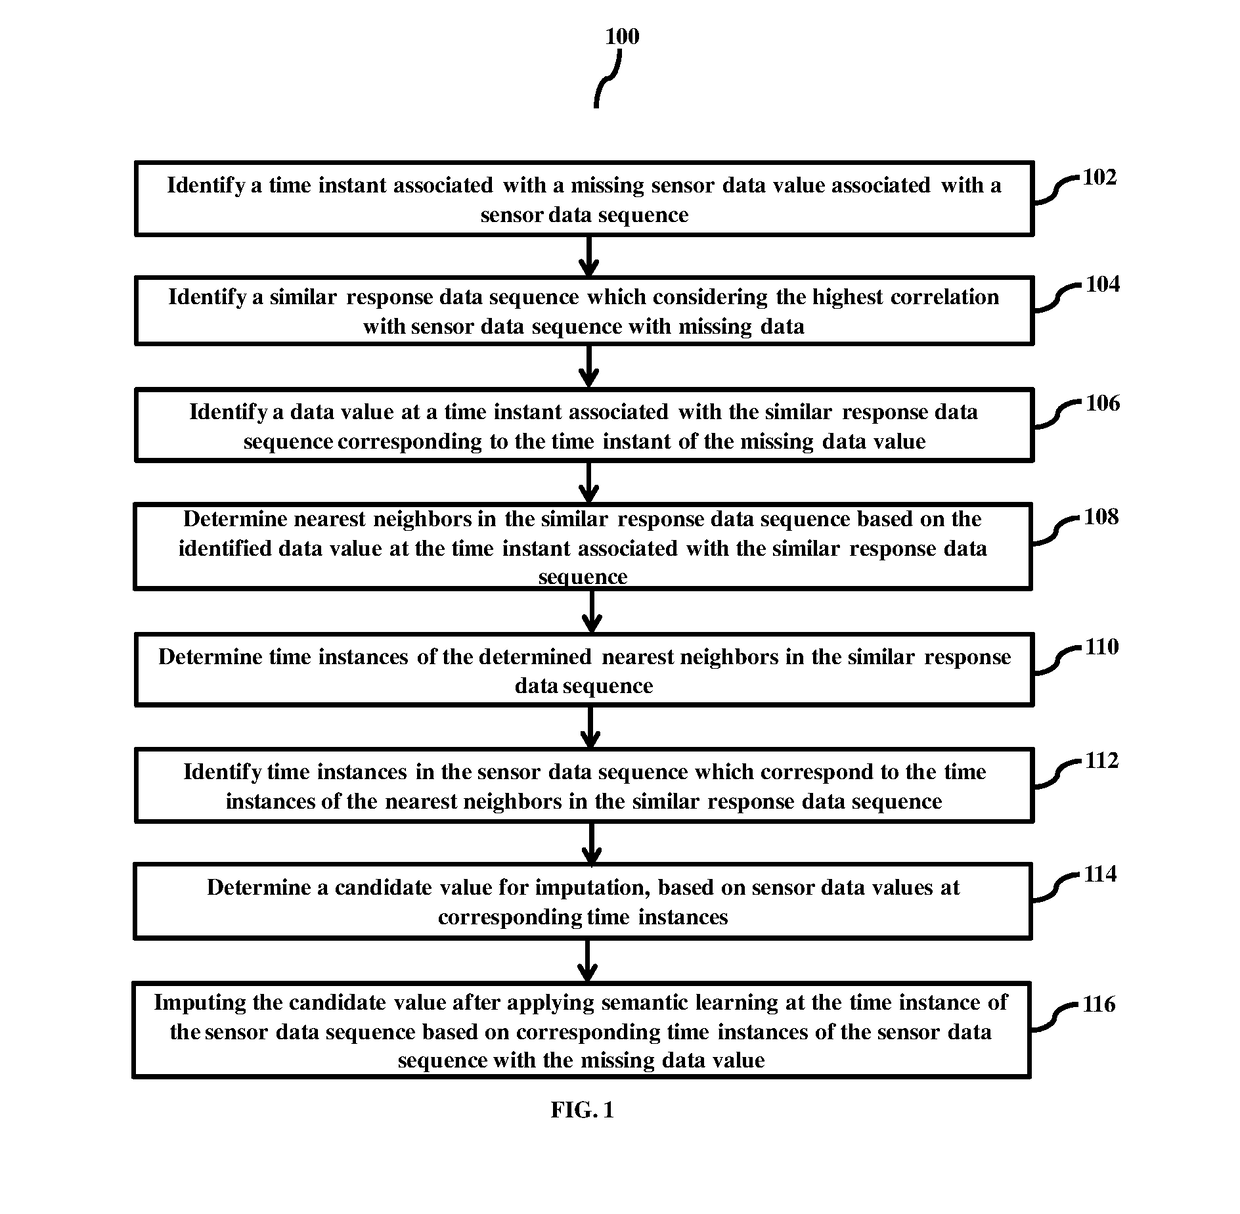 Method for imputing missed data in sensor data sequence with missing data